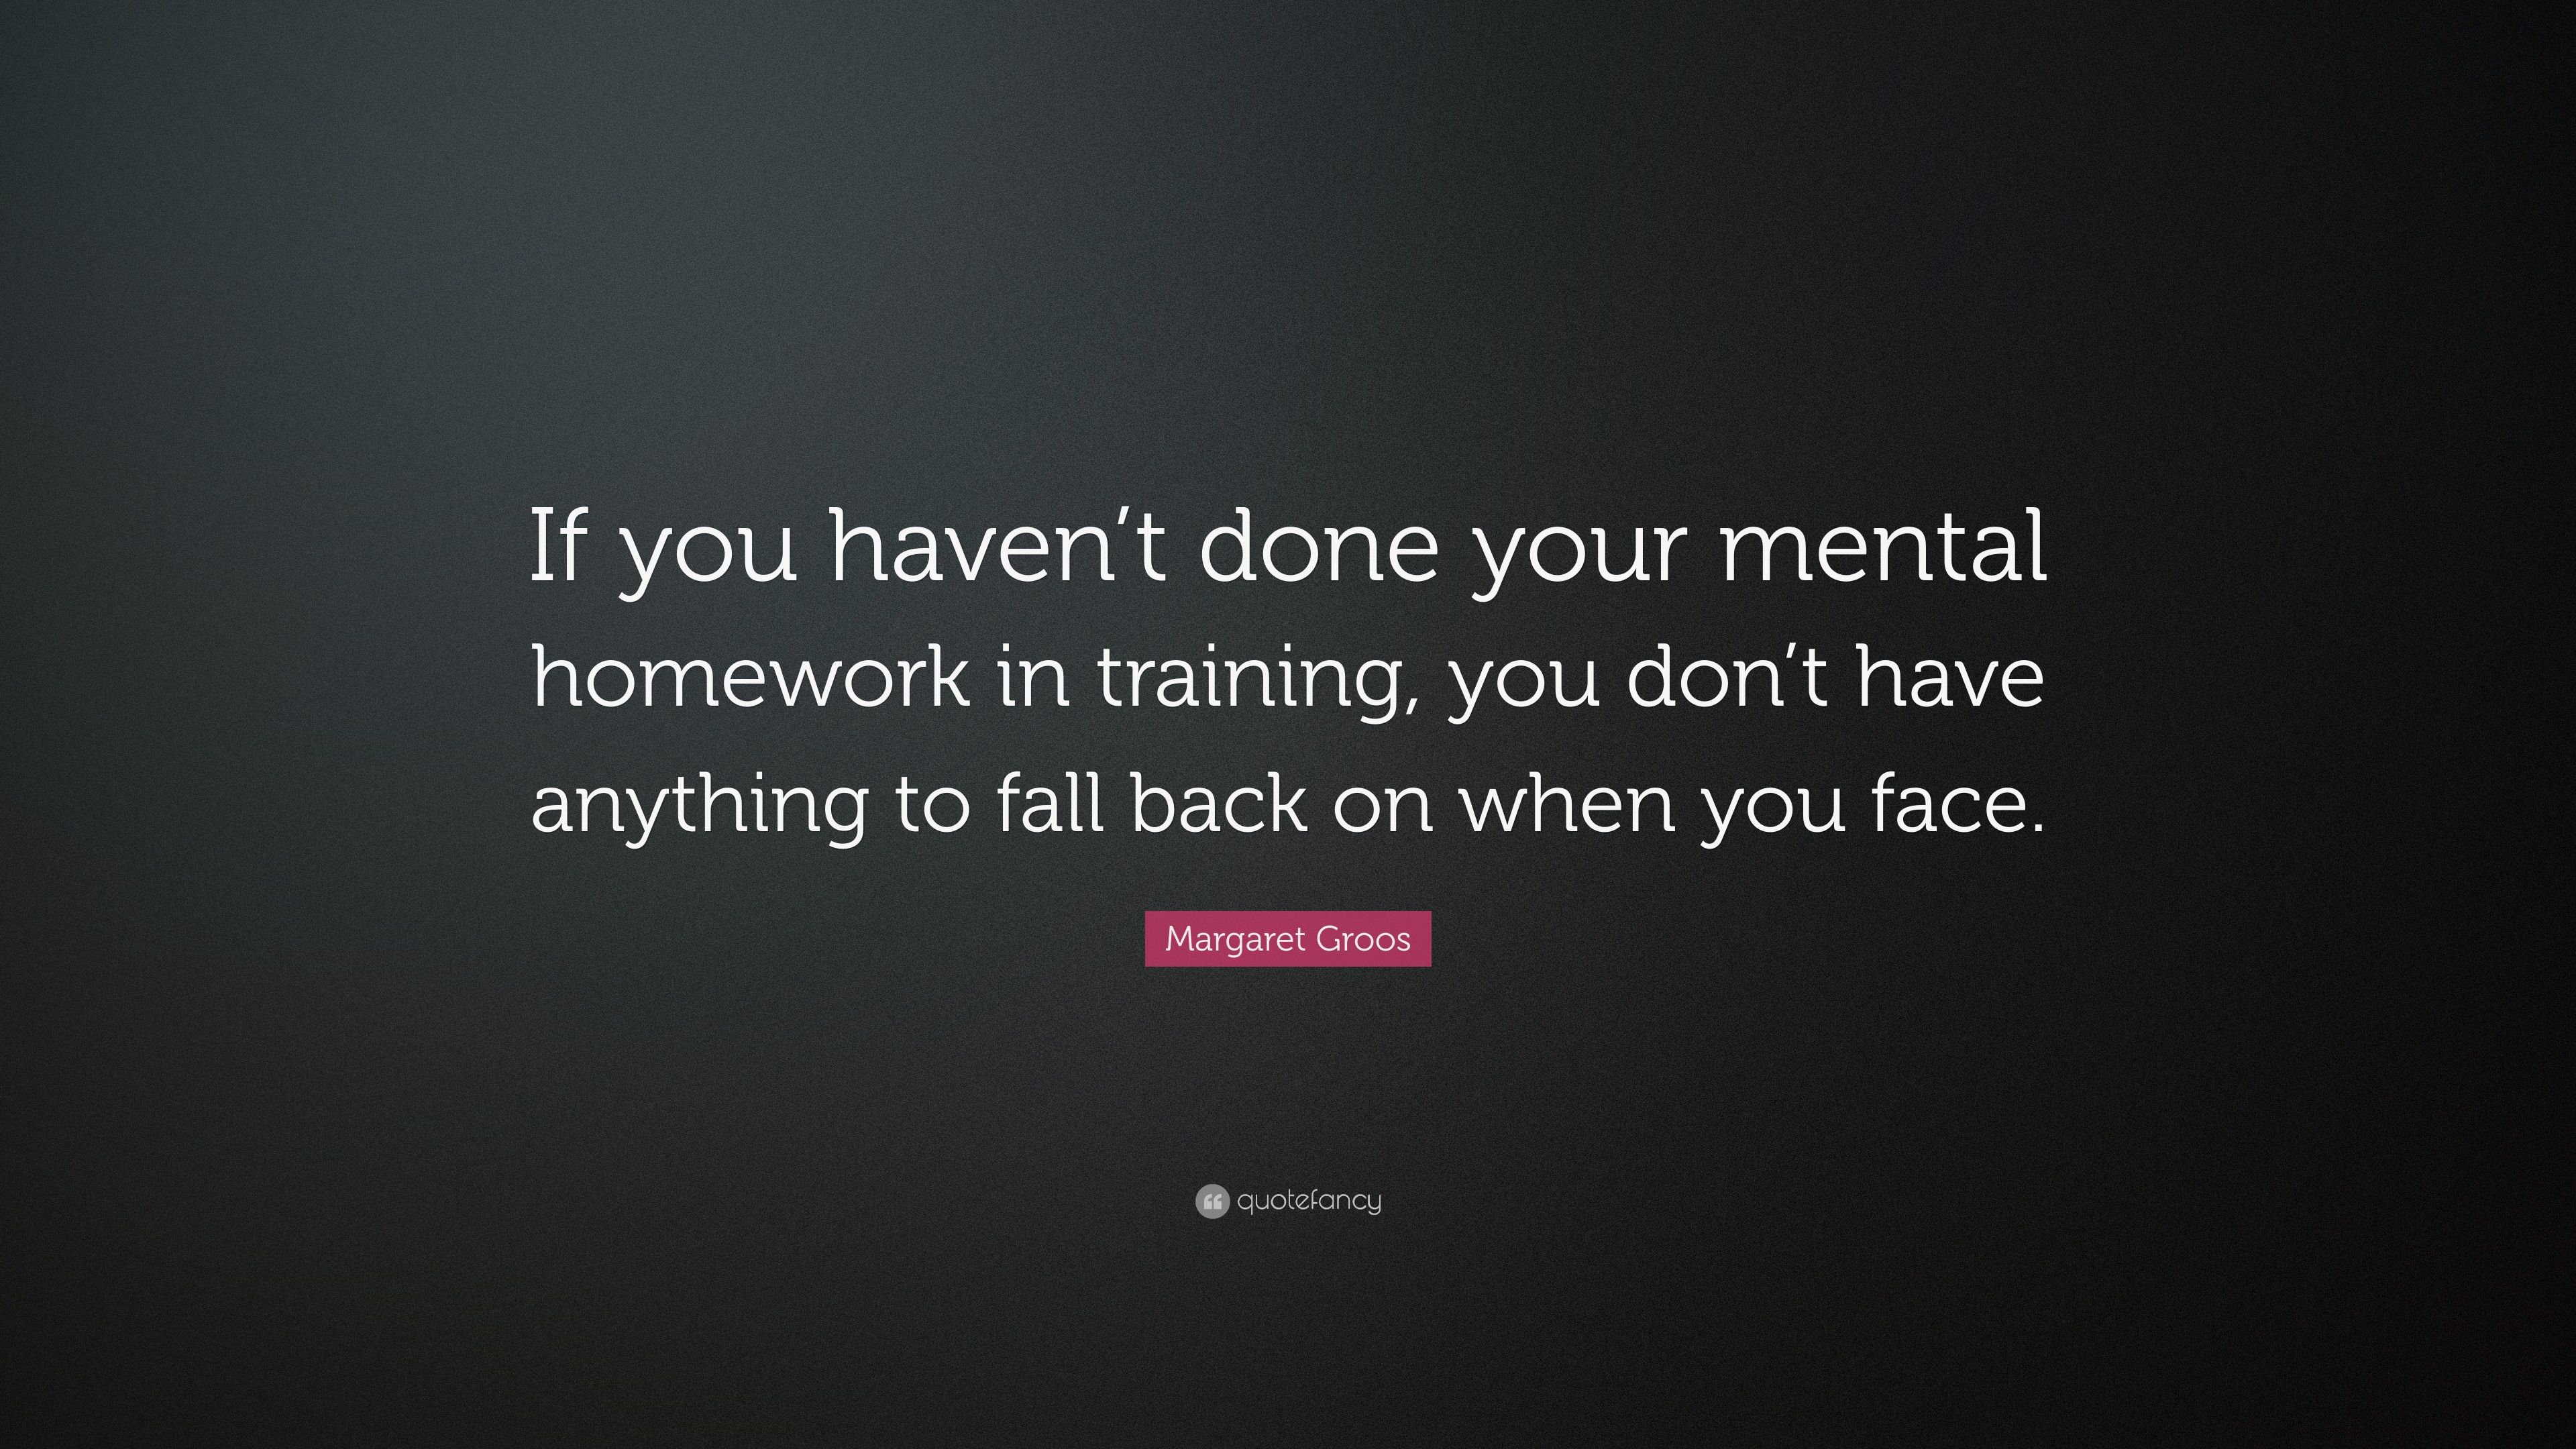 Margaret Groos Quote: “If you haven't done your mental homework